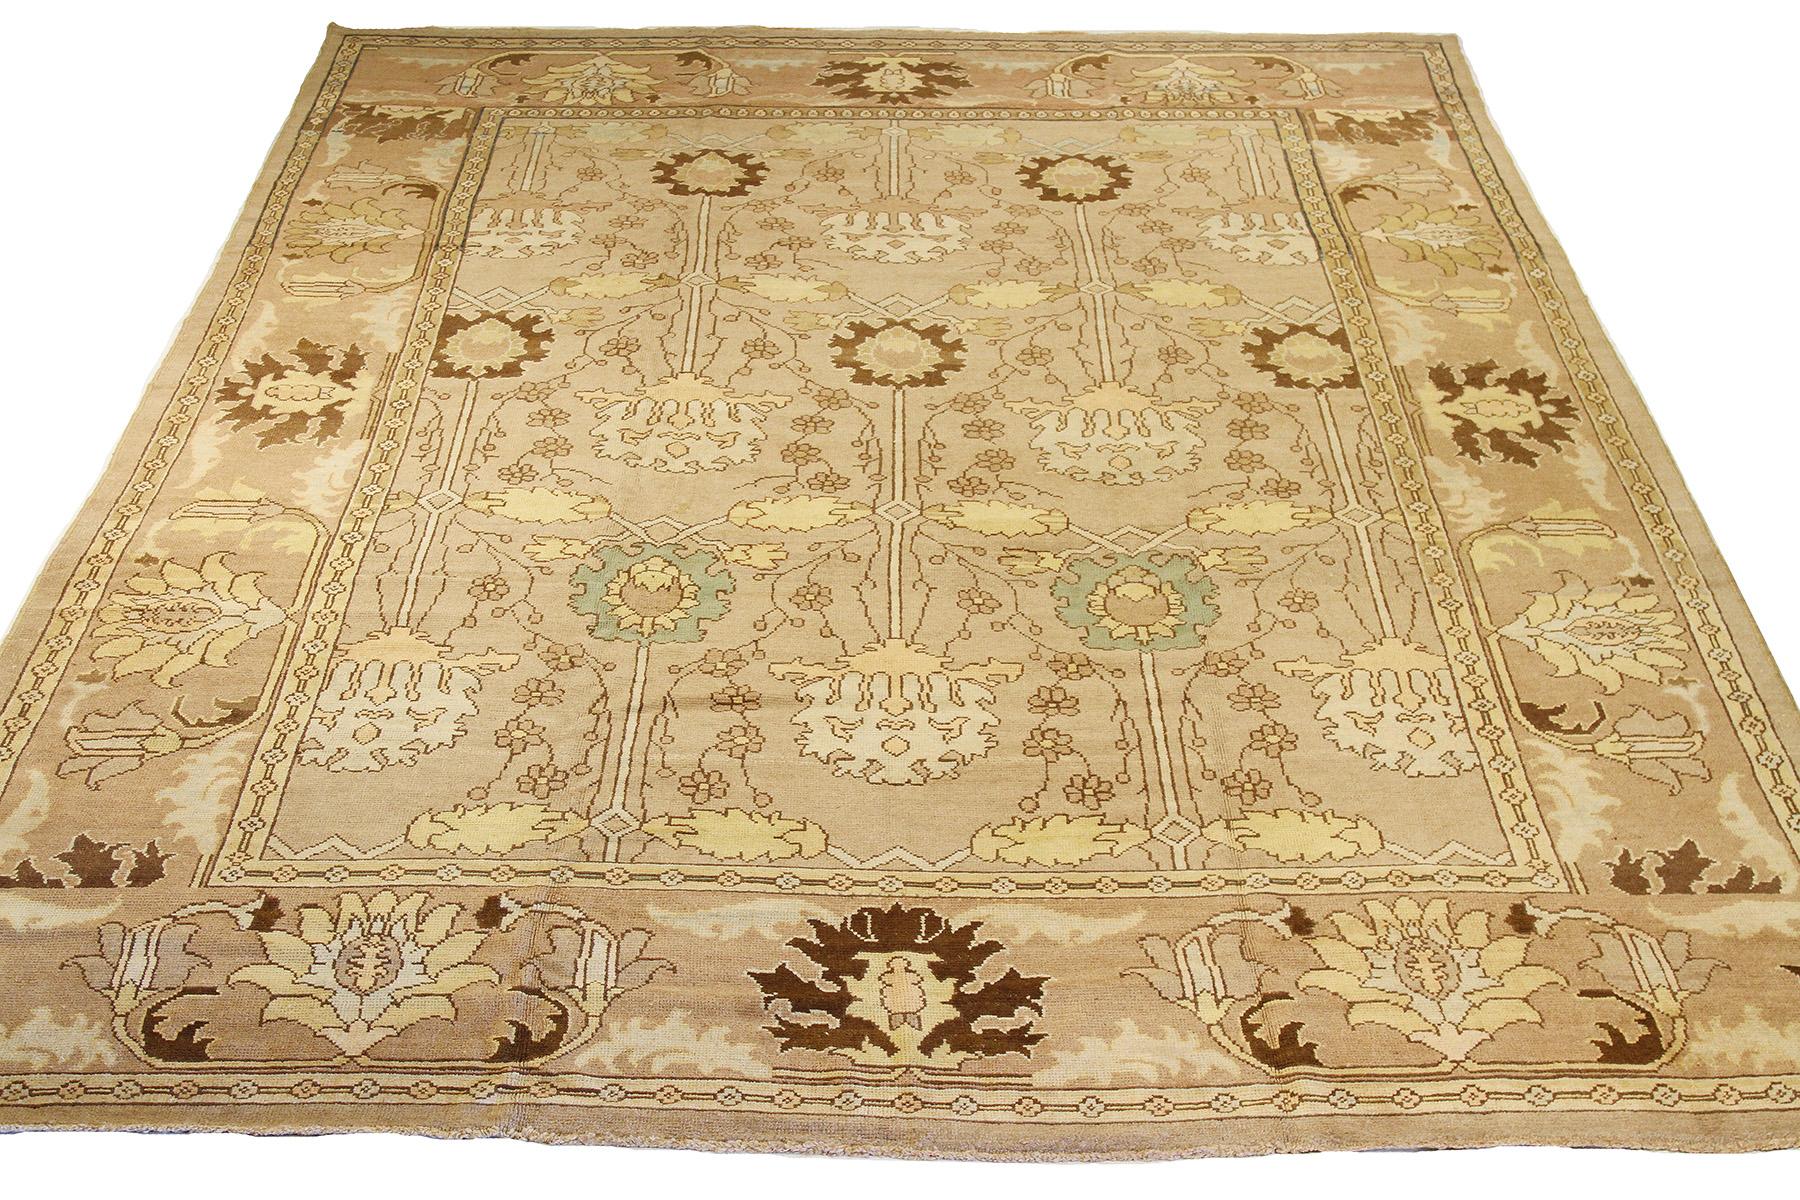 Contemporary handmade Turkish area rug from high-quality sheep’s wool and colored with eco-friendly vegetable dyes that are proven safe for humans and pets alike. It’s a Donegal design showcasing an ivory field with beautiful beige and brown floral